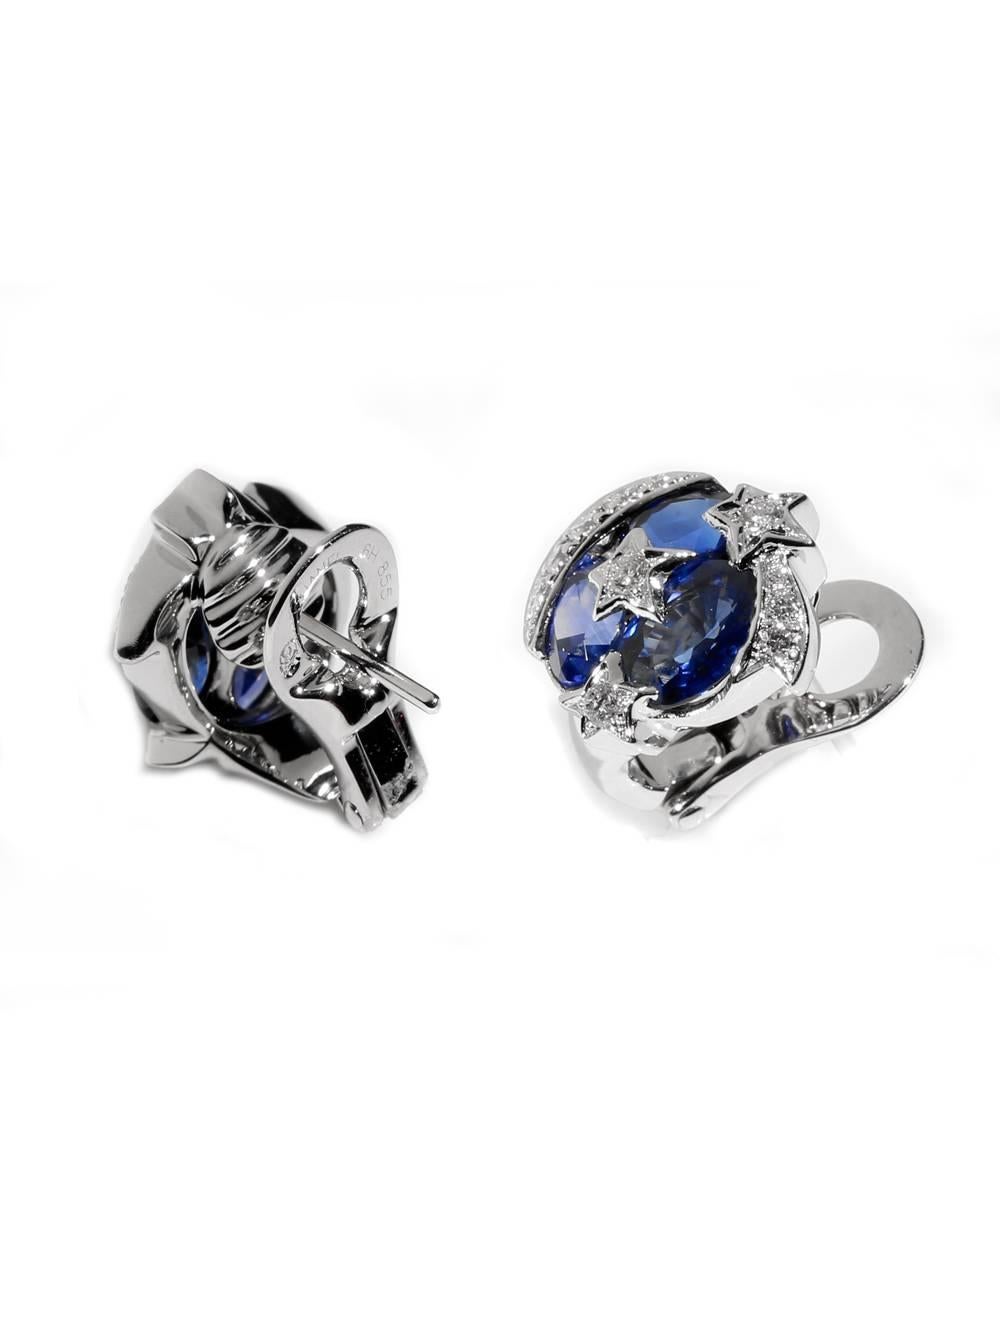 A chic pair of authentic Chanel Comete earrings featuring sapphires and diamonds,Diamonds formed into stars add the Chanel touch of class!

Dimensions: 1/2″ in diameter

Inventory ID: 0000041